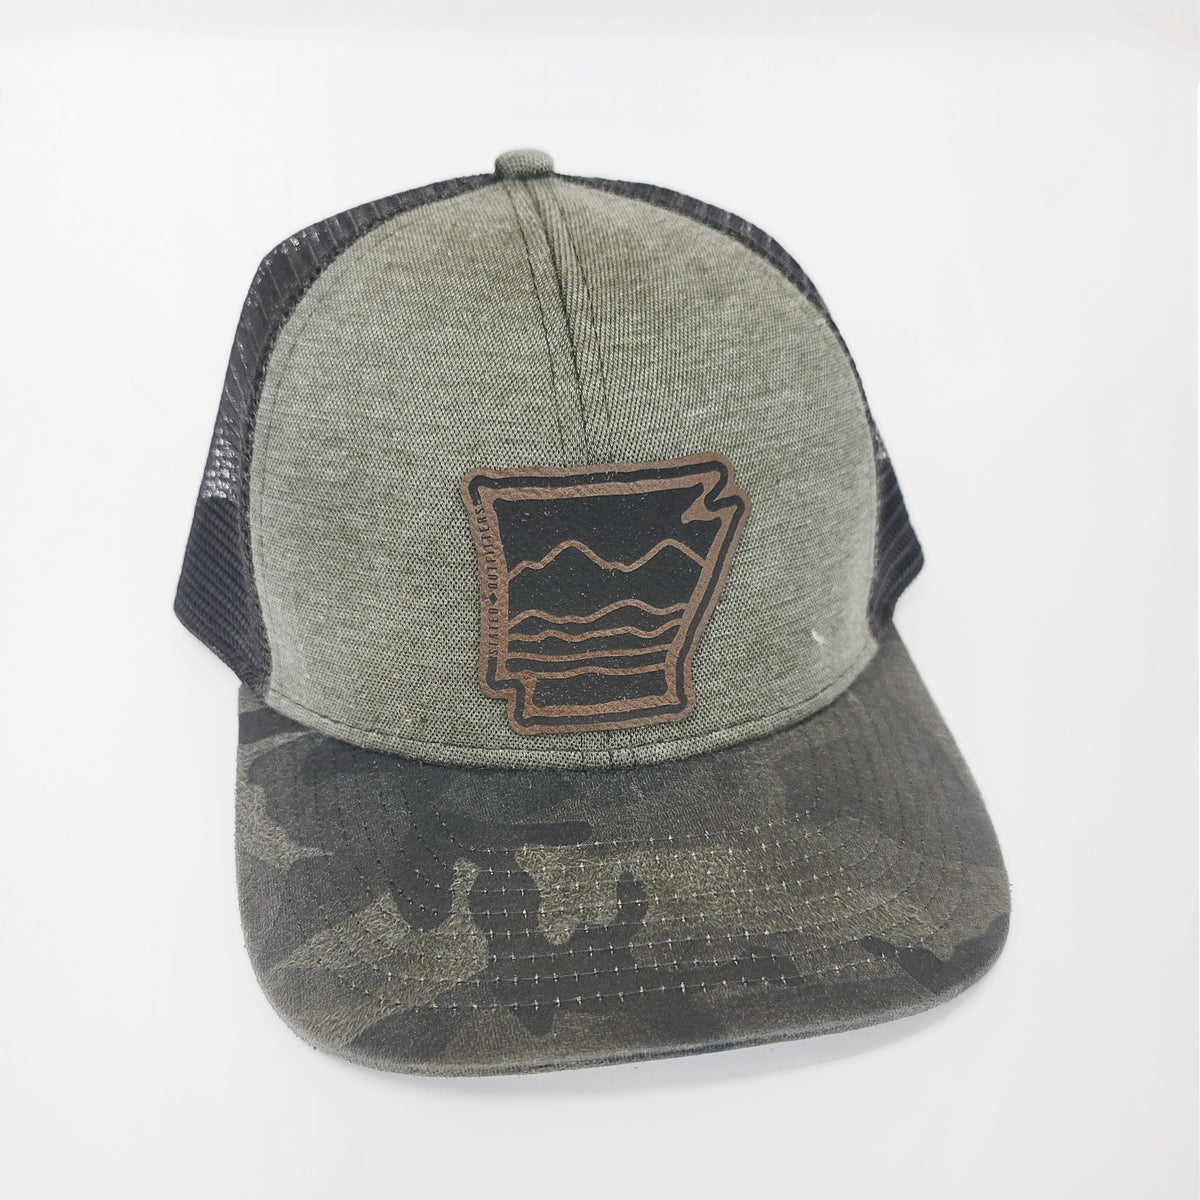 Stated Outfitters AR Patch Grey Camo Hat